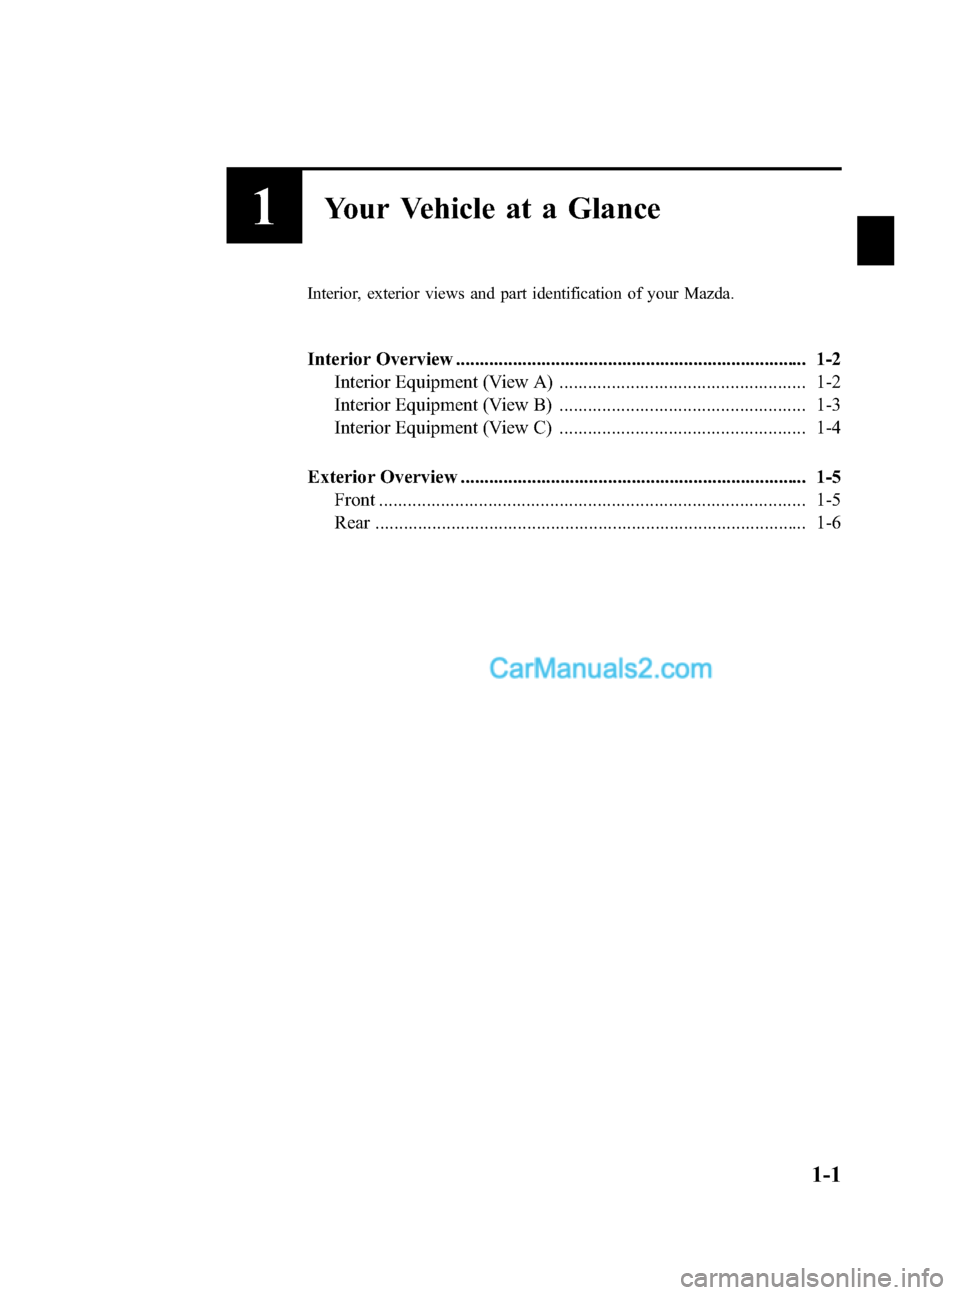 MAZDA MODEL CX-9 2015  Owners Manual (in English) Black plate (7,1)
1Your Vehicle at a Glance
Interior, exterior views and part identification of your Mazda.
Interior Overview ..........................................................................